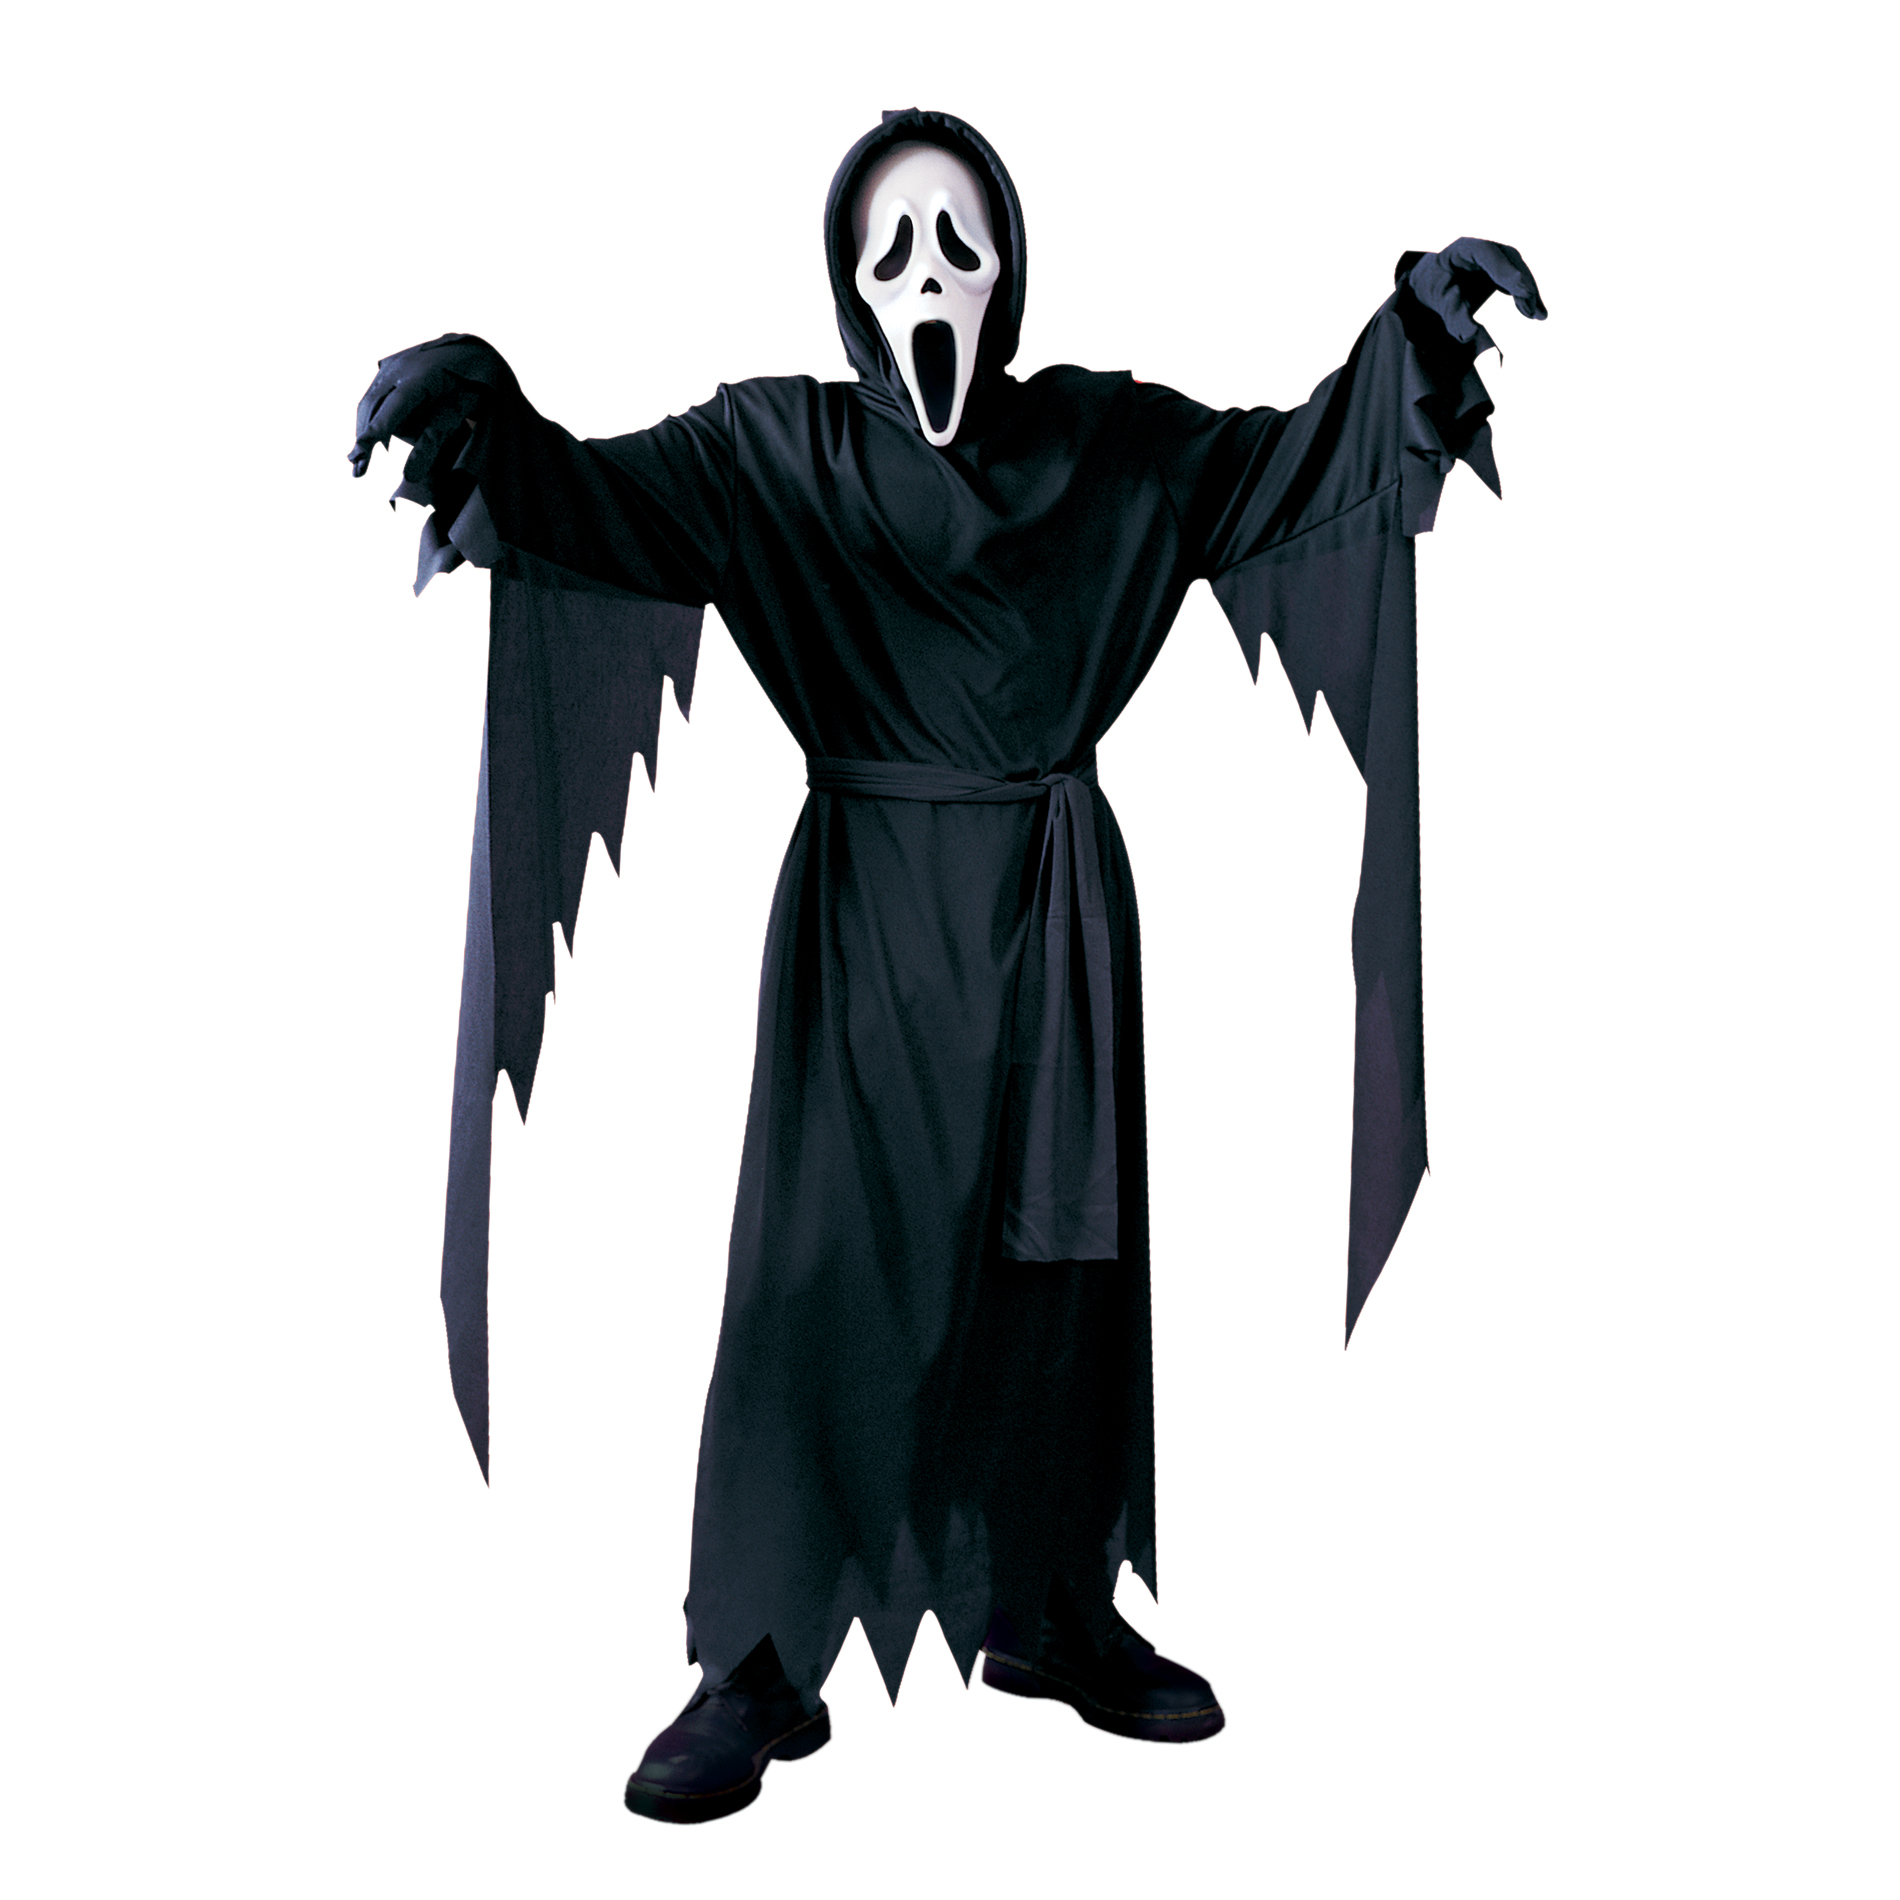 Boys Scream Halloween Costume Size: One Size Fits Most